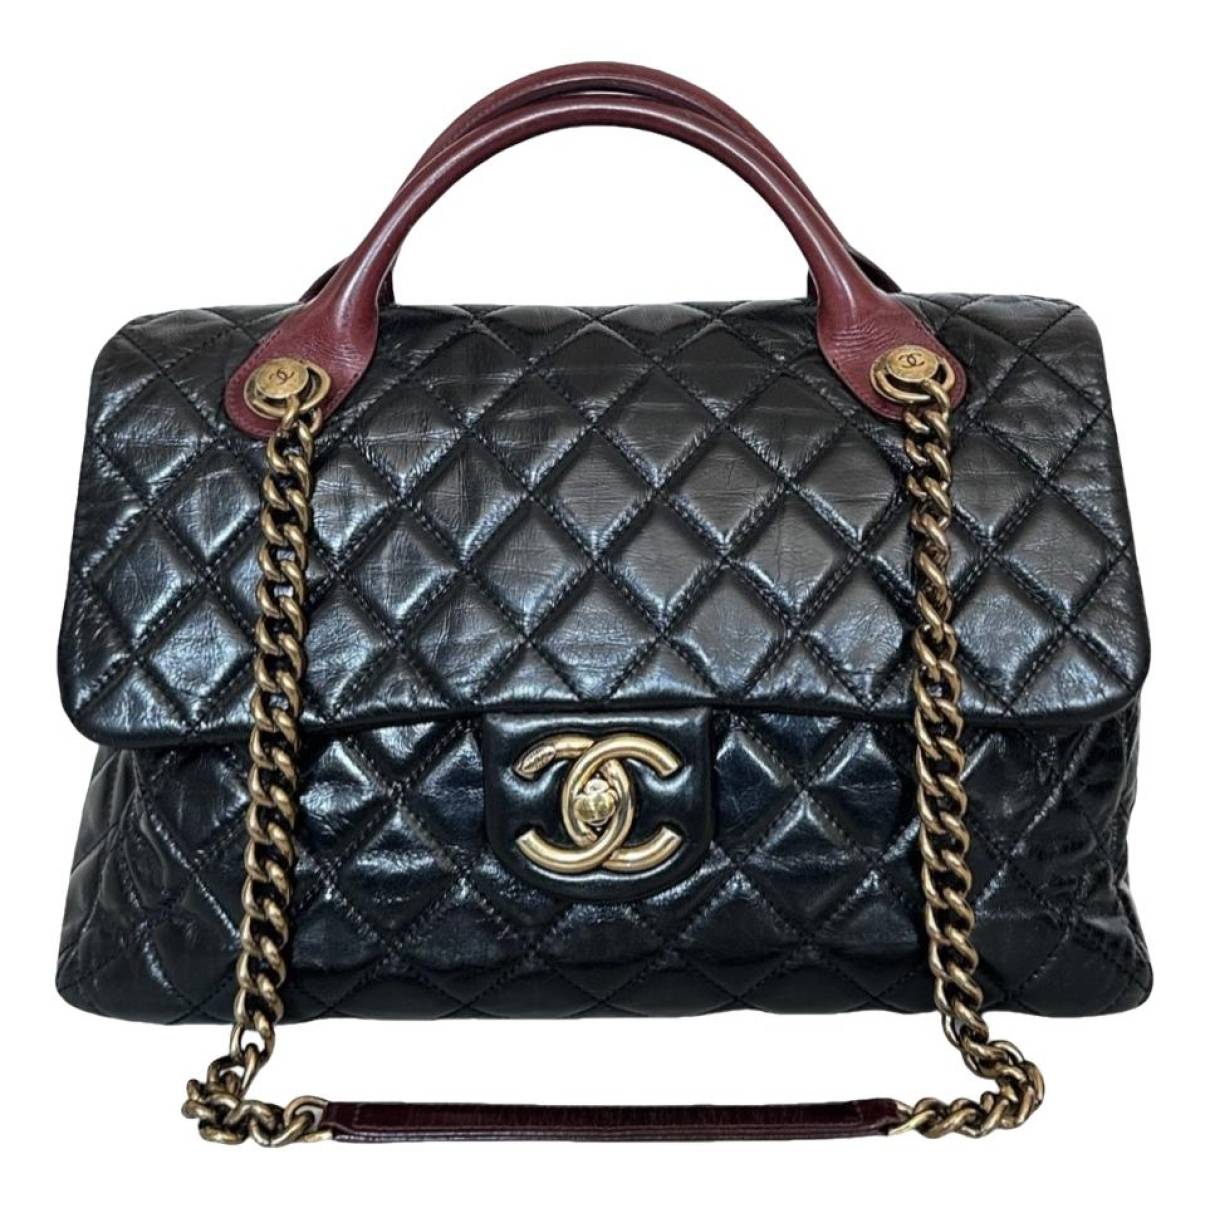 Chanel - Authenticated Timeless Classique Top Handle Handbag - Patent Leather Black for Women, Very Good Condition